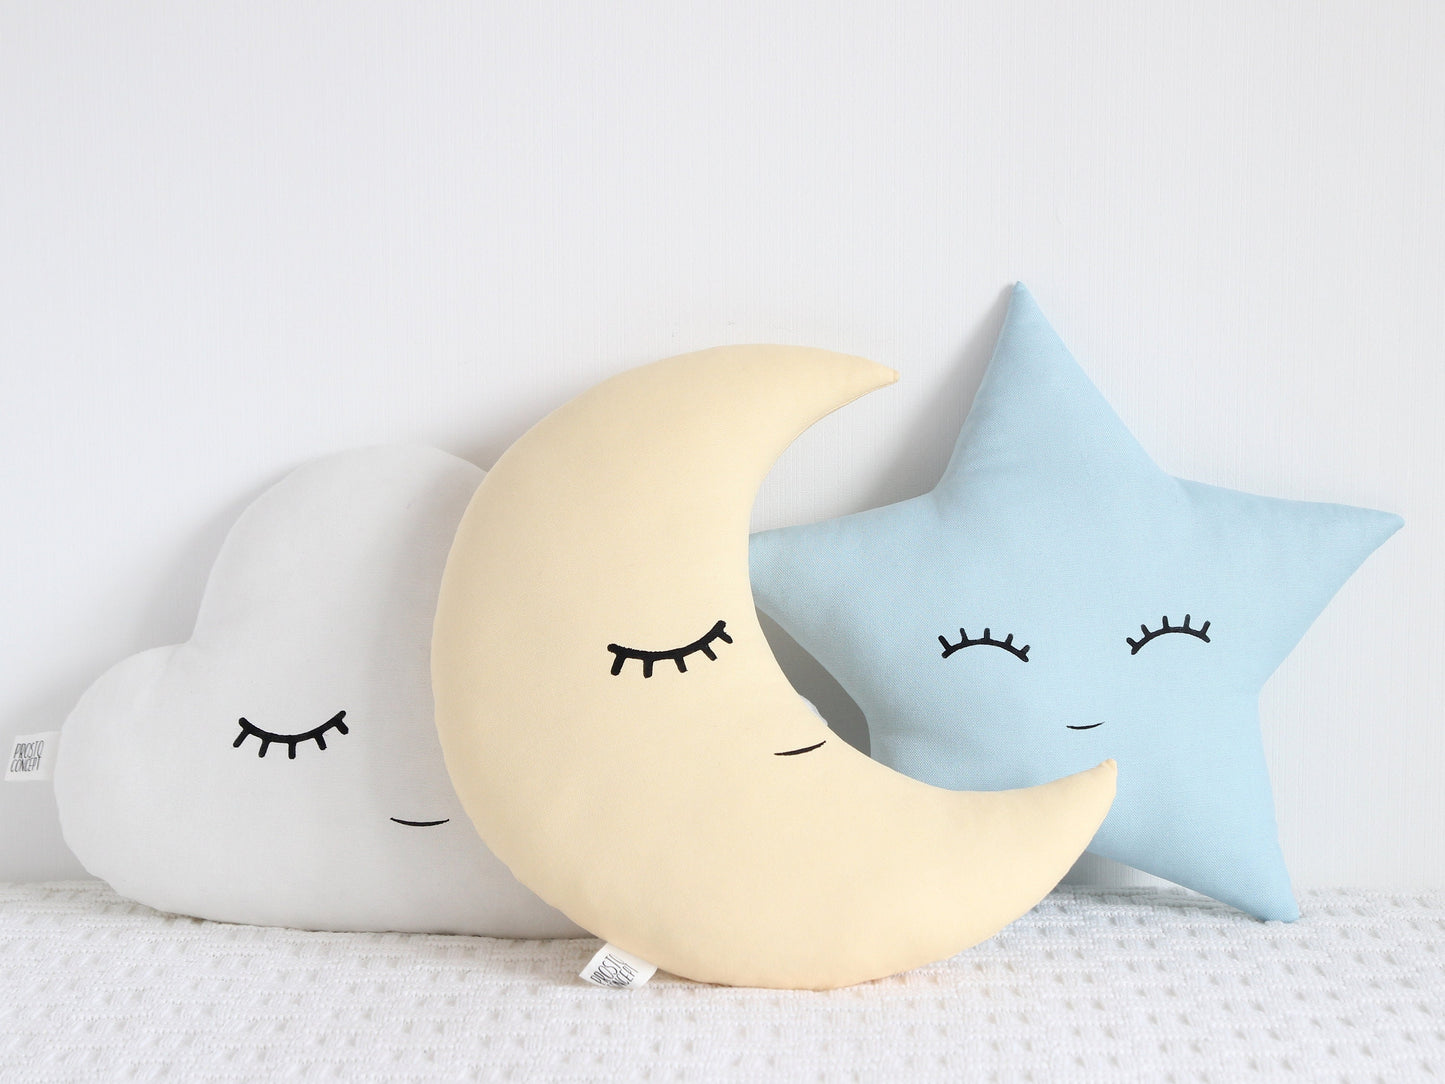 Set of 3 Pillows - White Cloud, Pastel Yellow Crescent Moon And Light Blue Star Pillows